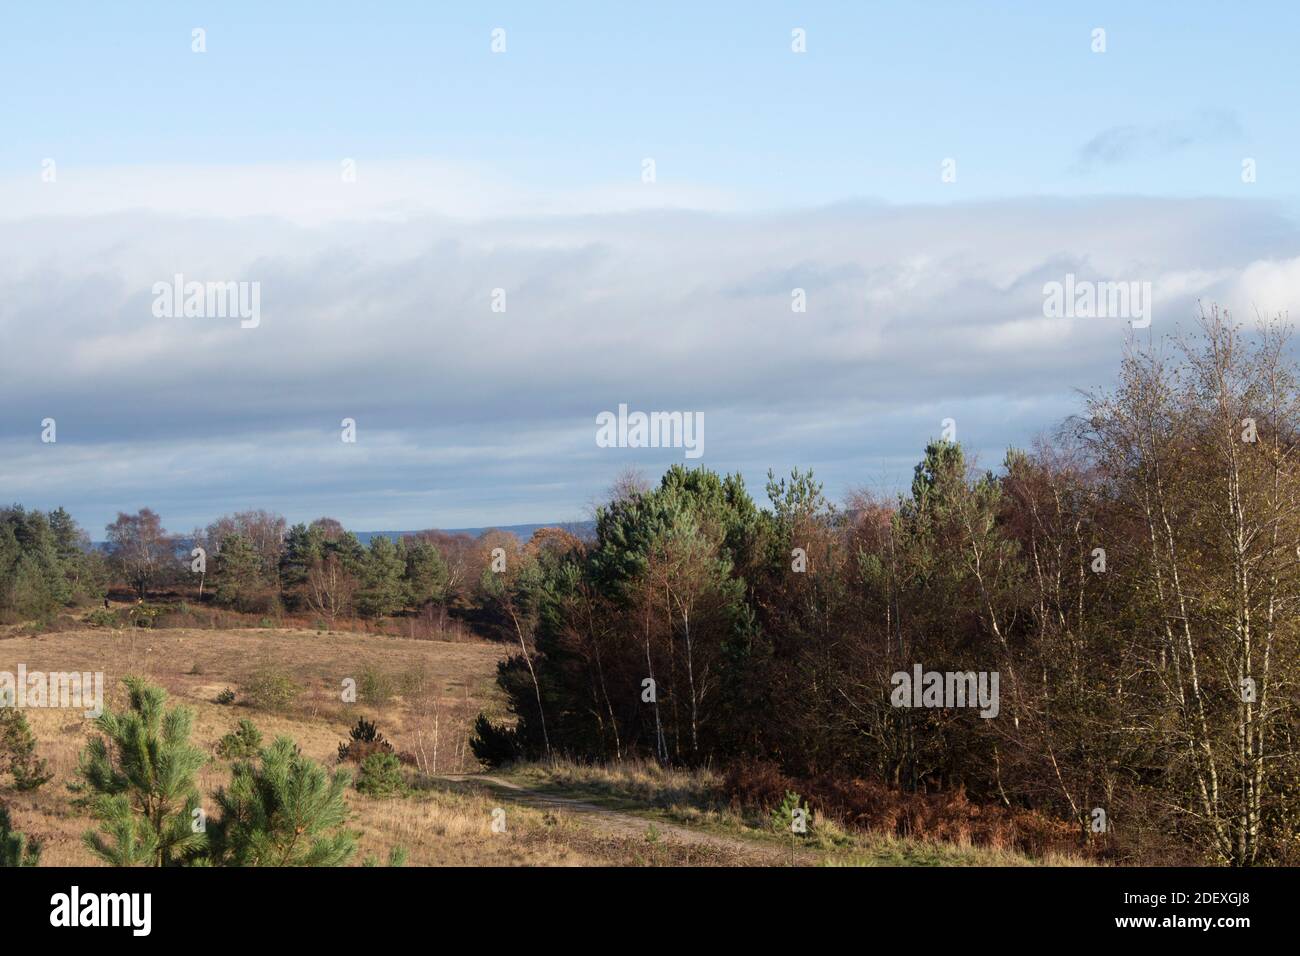 View of evergreen and silver birch trees with blue sky and white clouds in Fives area of Cannock Chase, Staffordshire Stock Photo